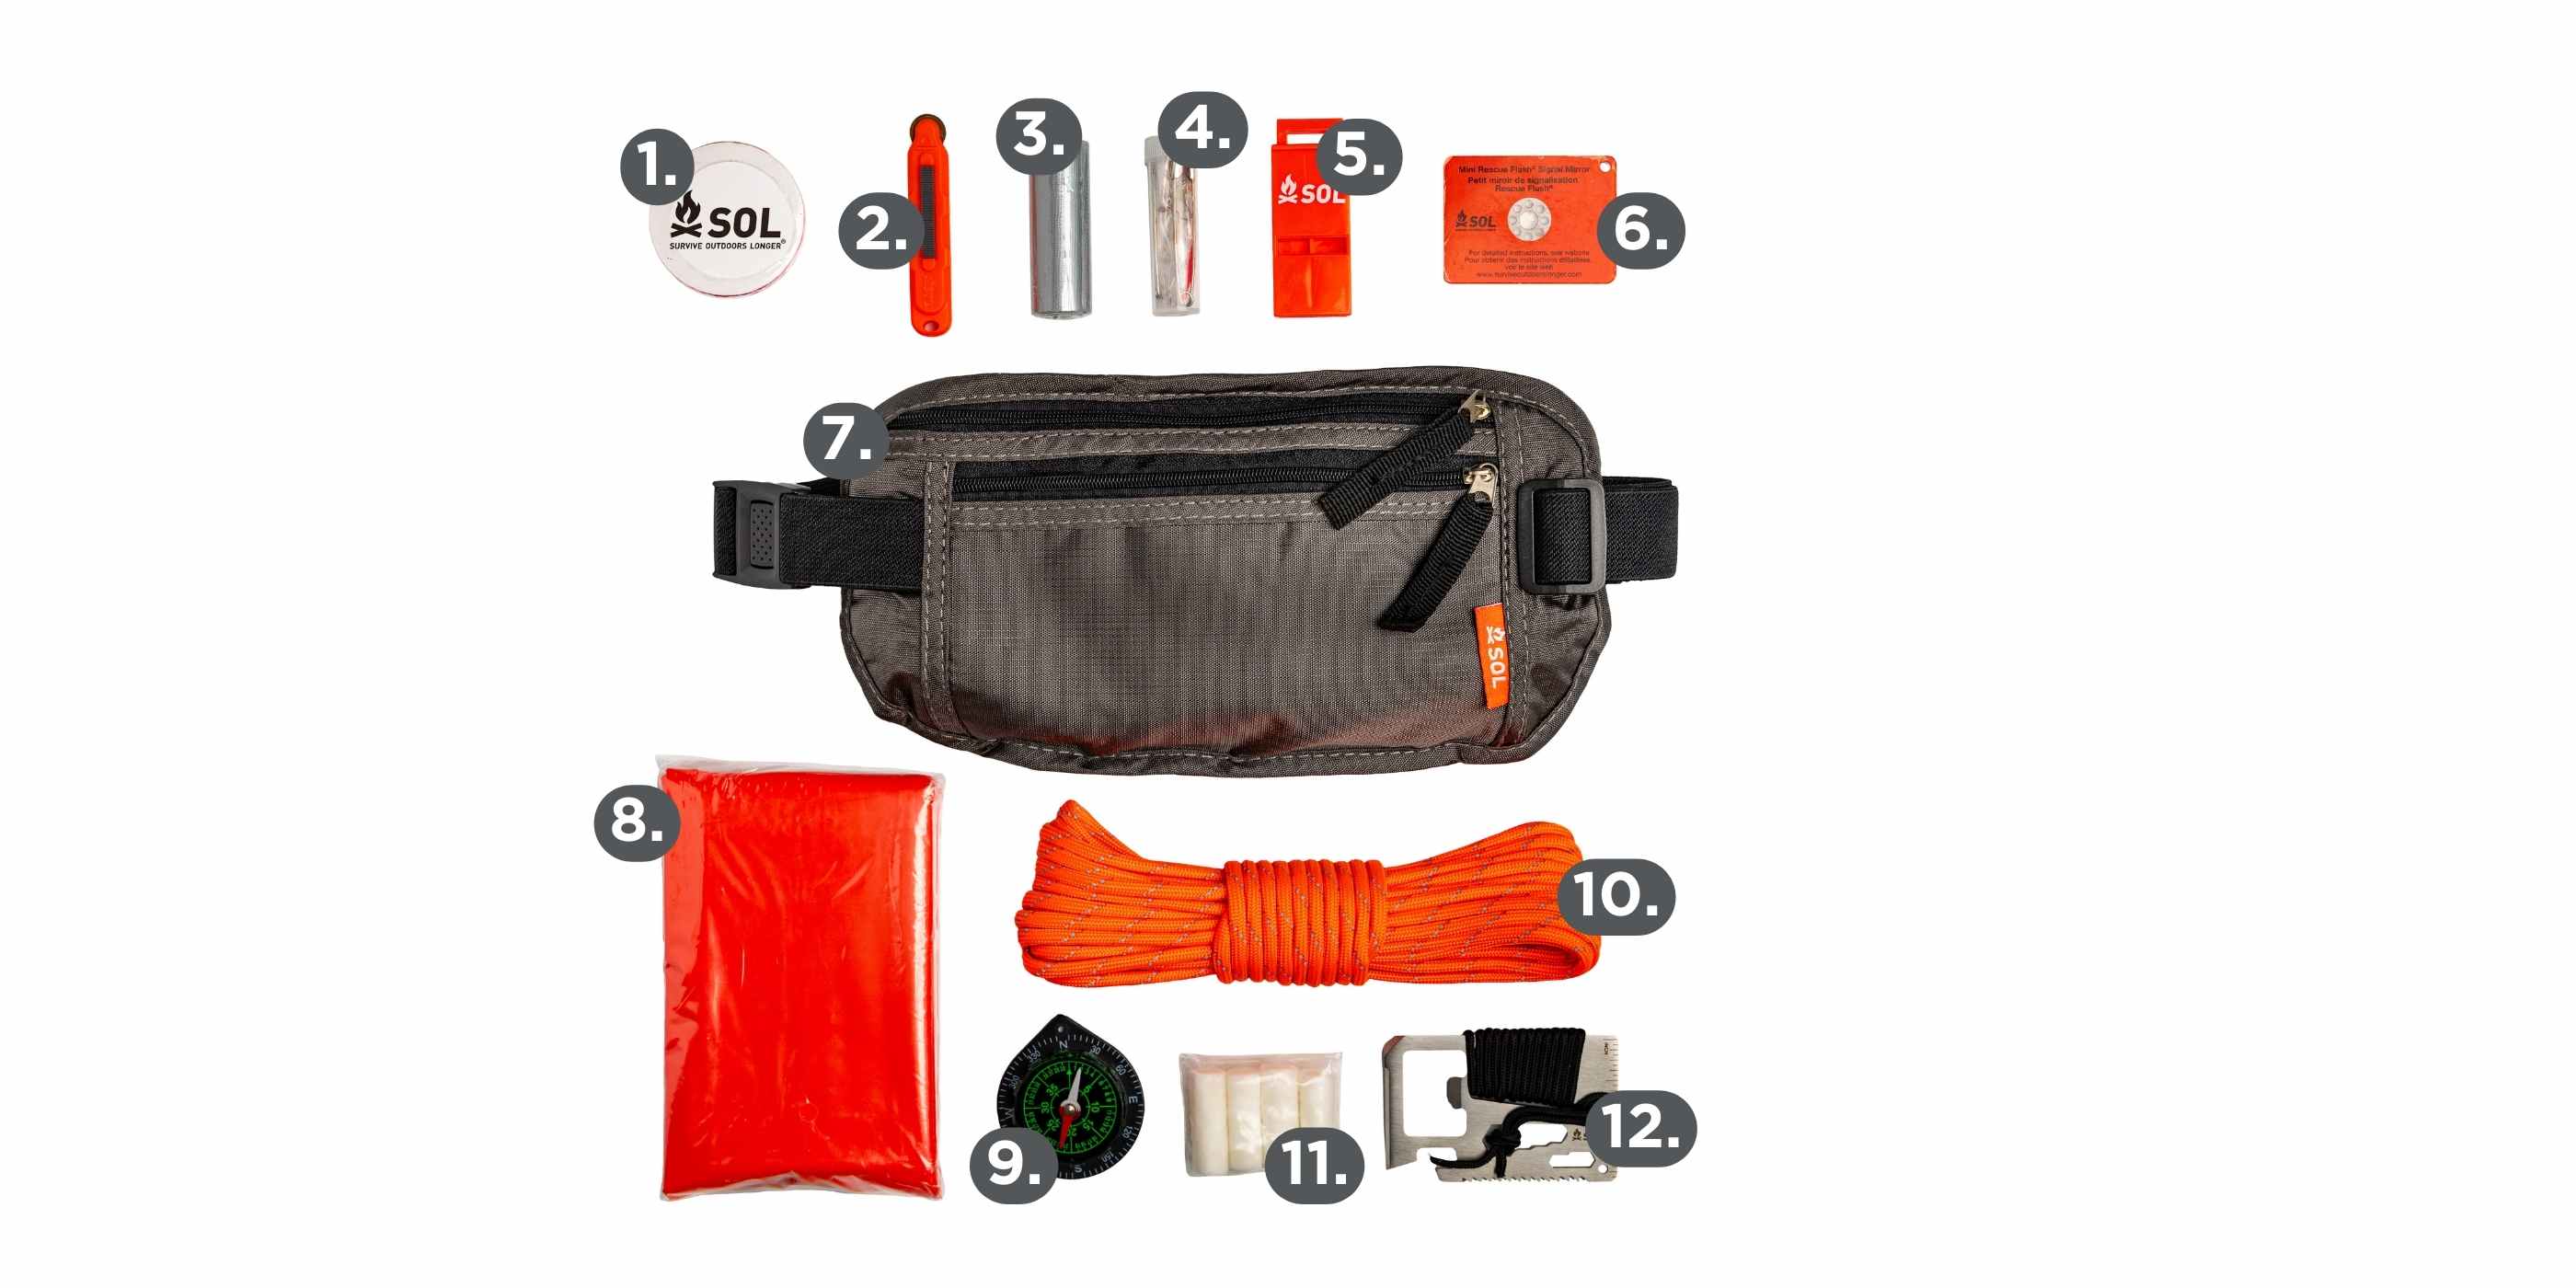 Trail Ready Kit Numbered Contents